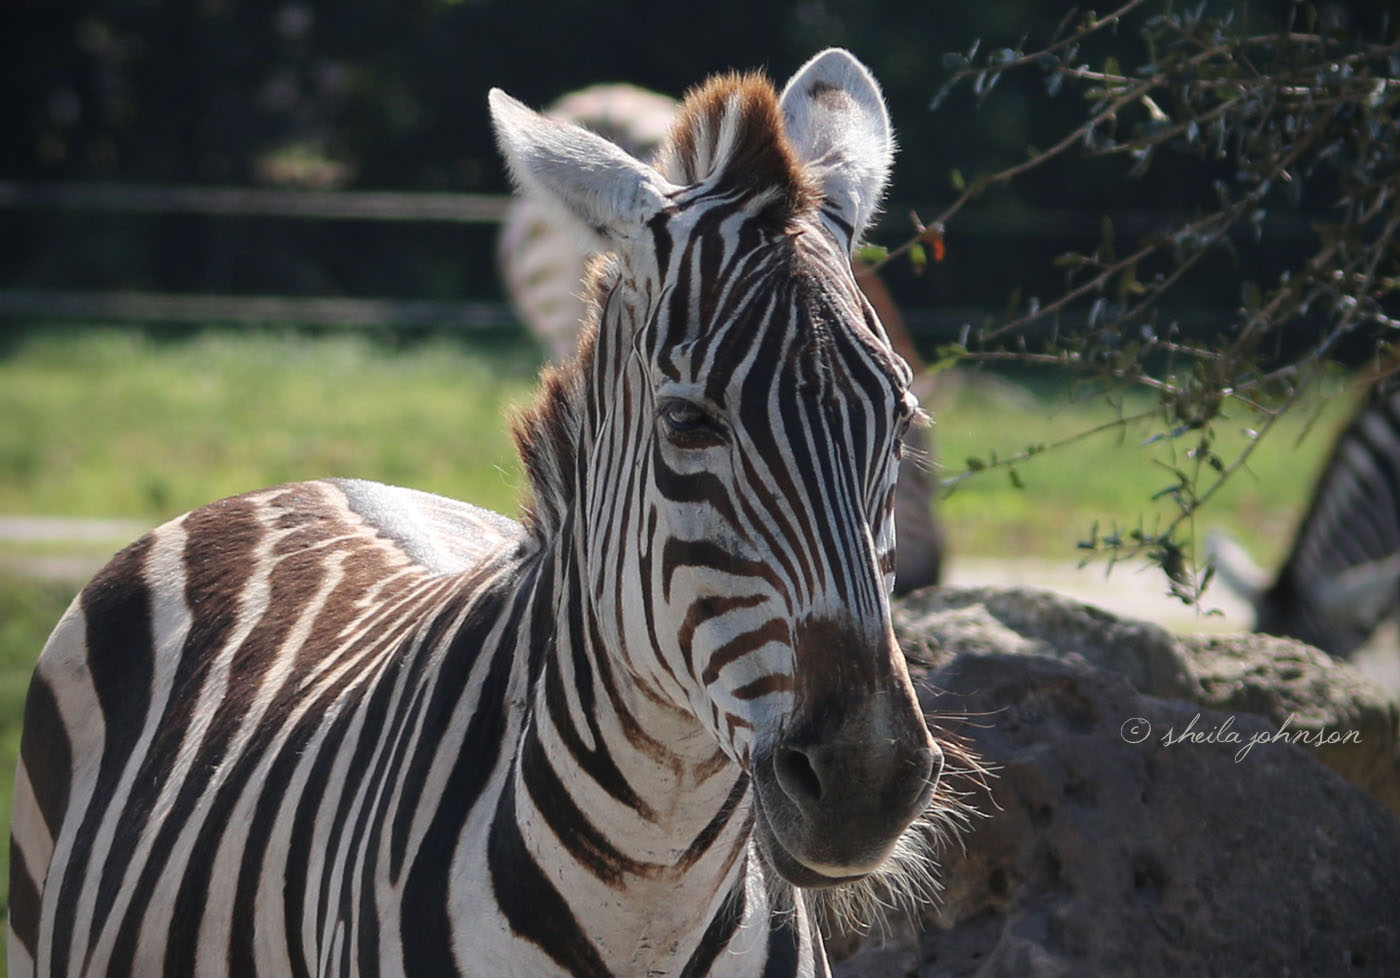 This Zebra Doesn't Look Like He's Feeling A Huff And A Puff Coming On, But He Sure Does Have The 'Hair Of My Chinny, Chin, Chin' Thing Going On!